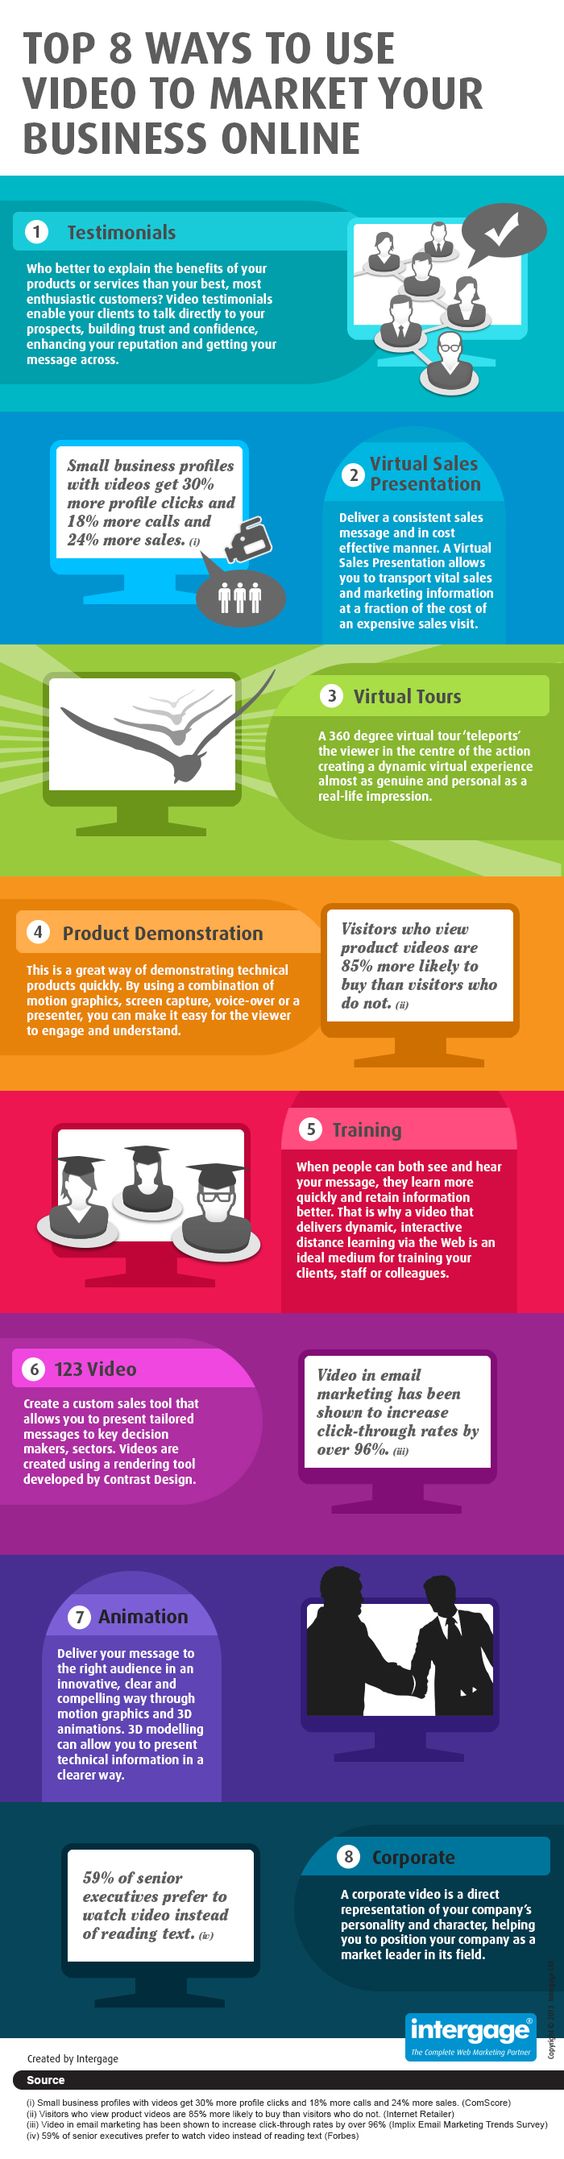 Top 8 Ways to Use #Video for #Business #infographic